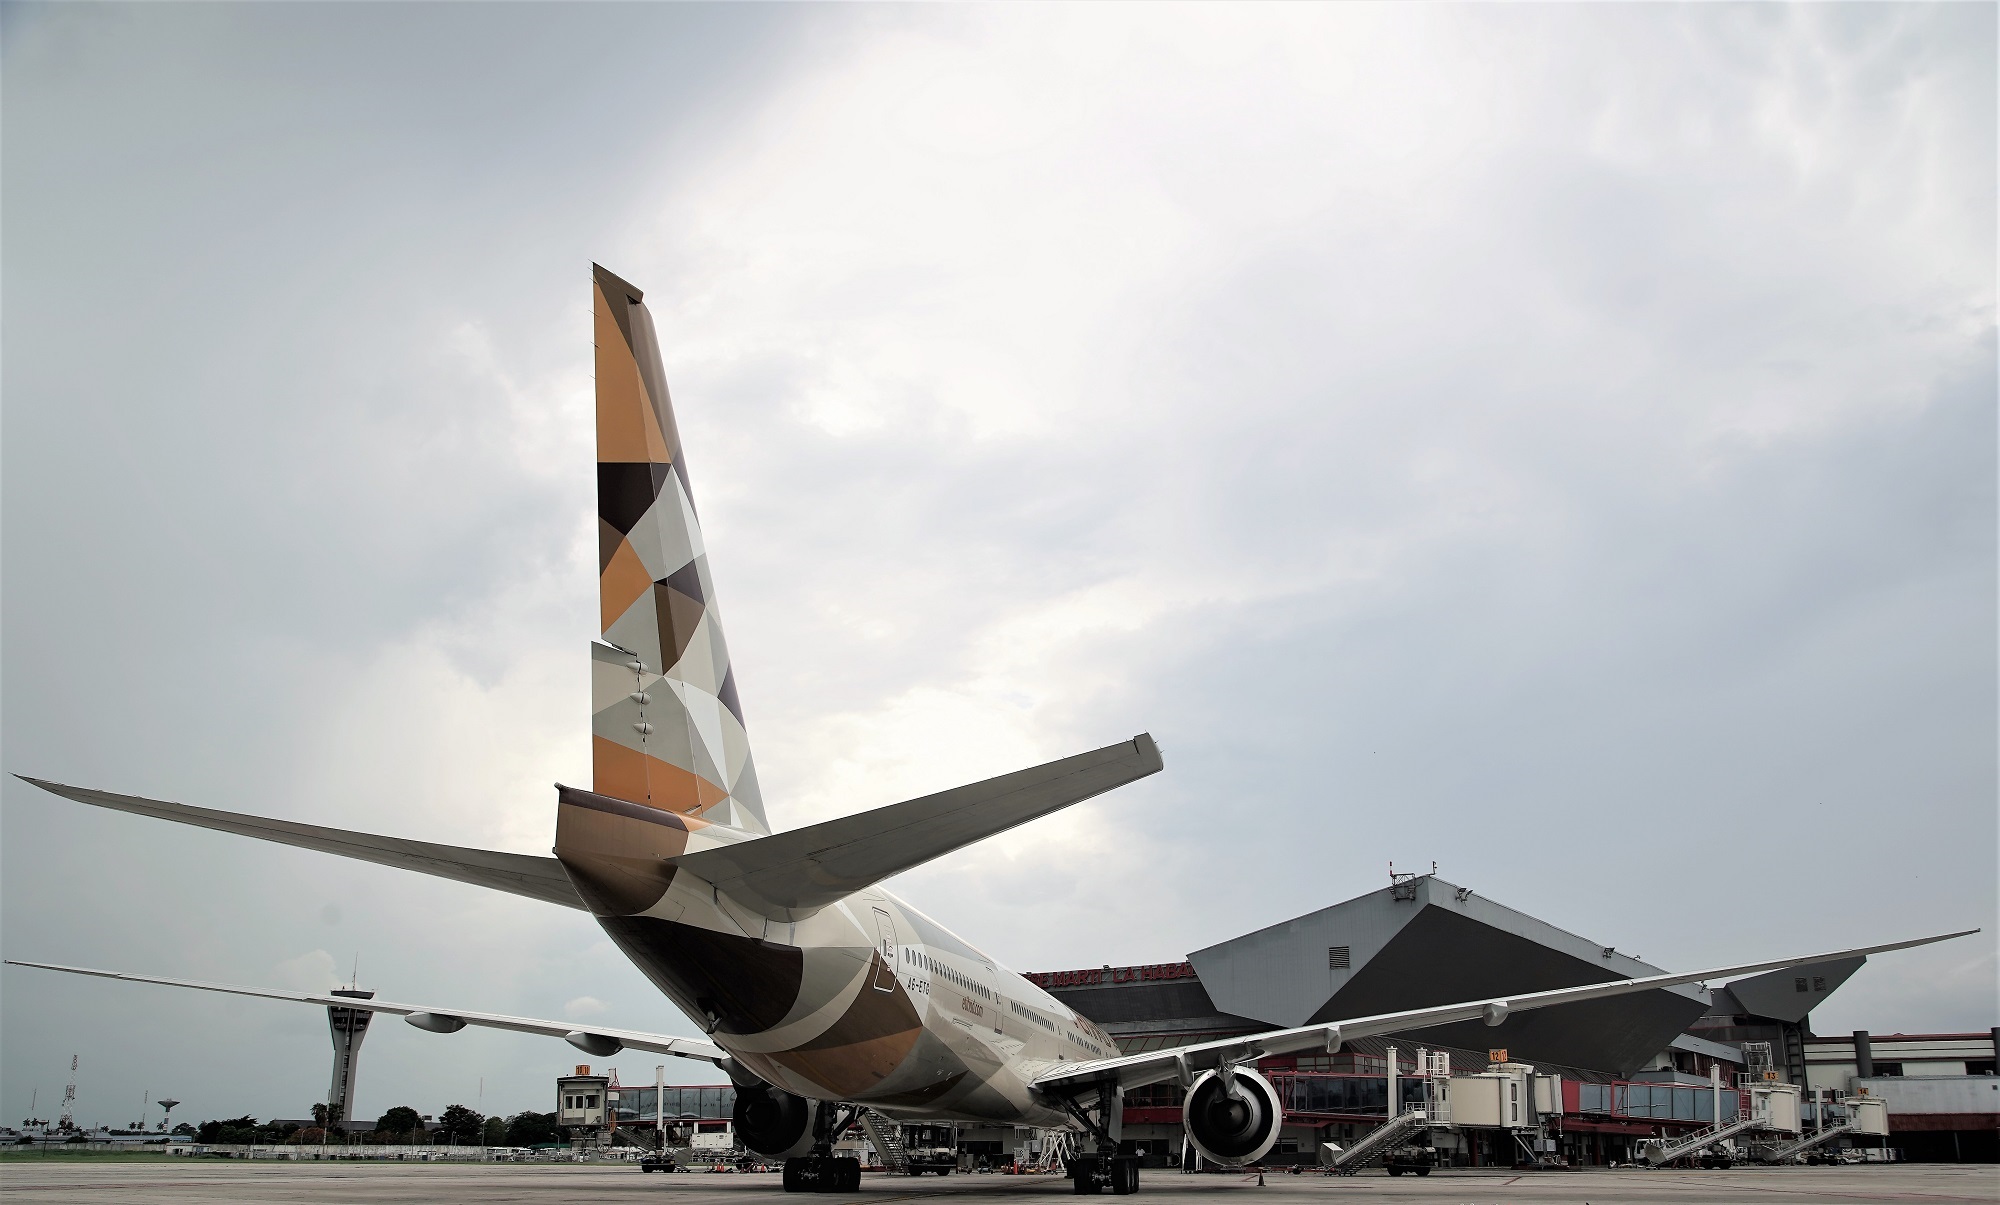 Etihad Airways Lands In Cuba For The First Time, Adding To Growing List Of Global Goodwill Flights